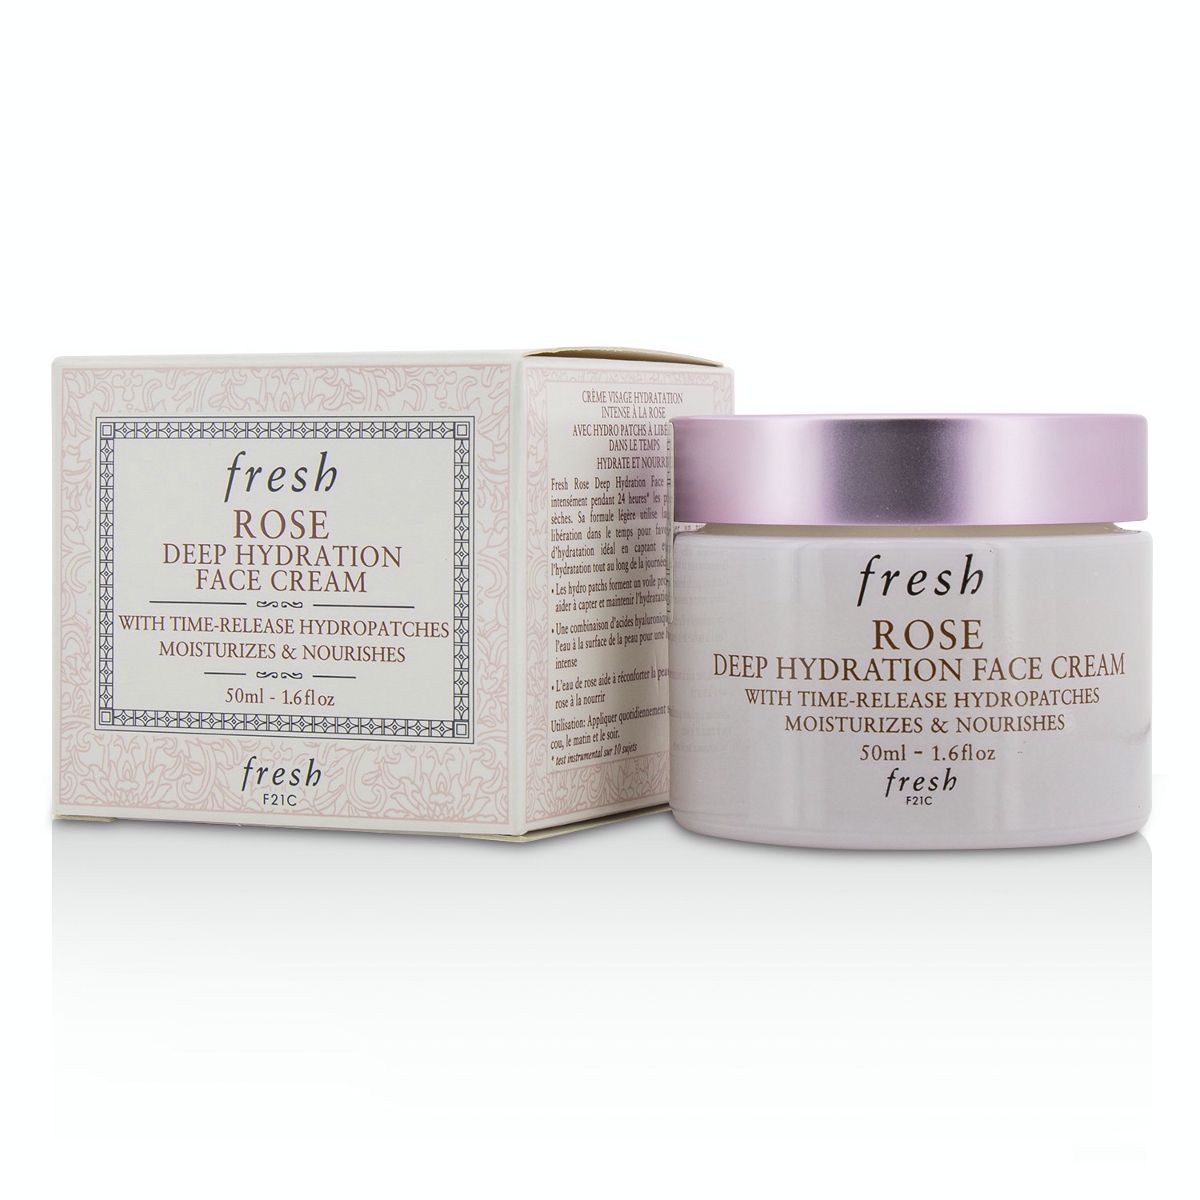 Rose Deep Hydration Face Cream - Normal to Dry Skin Types Fresh Image